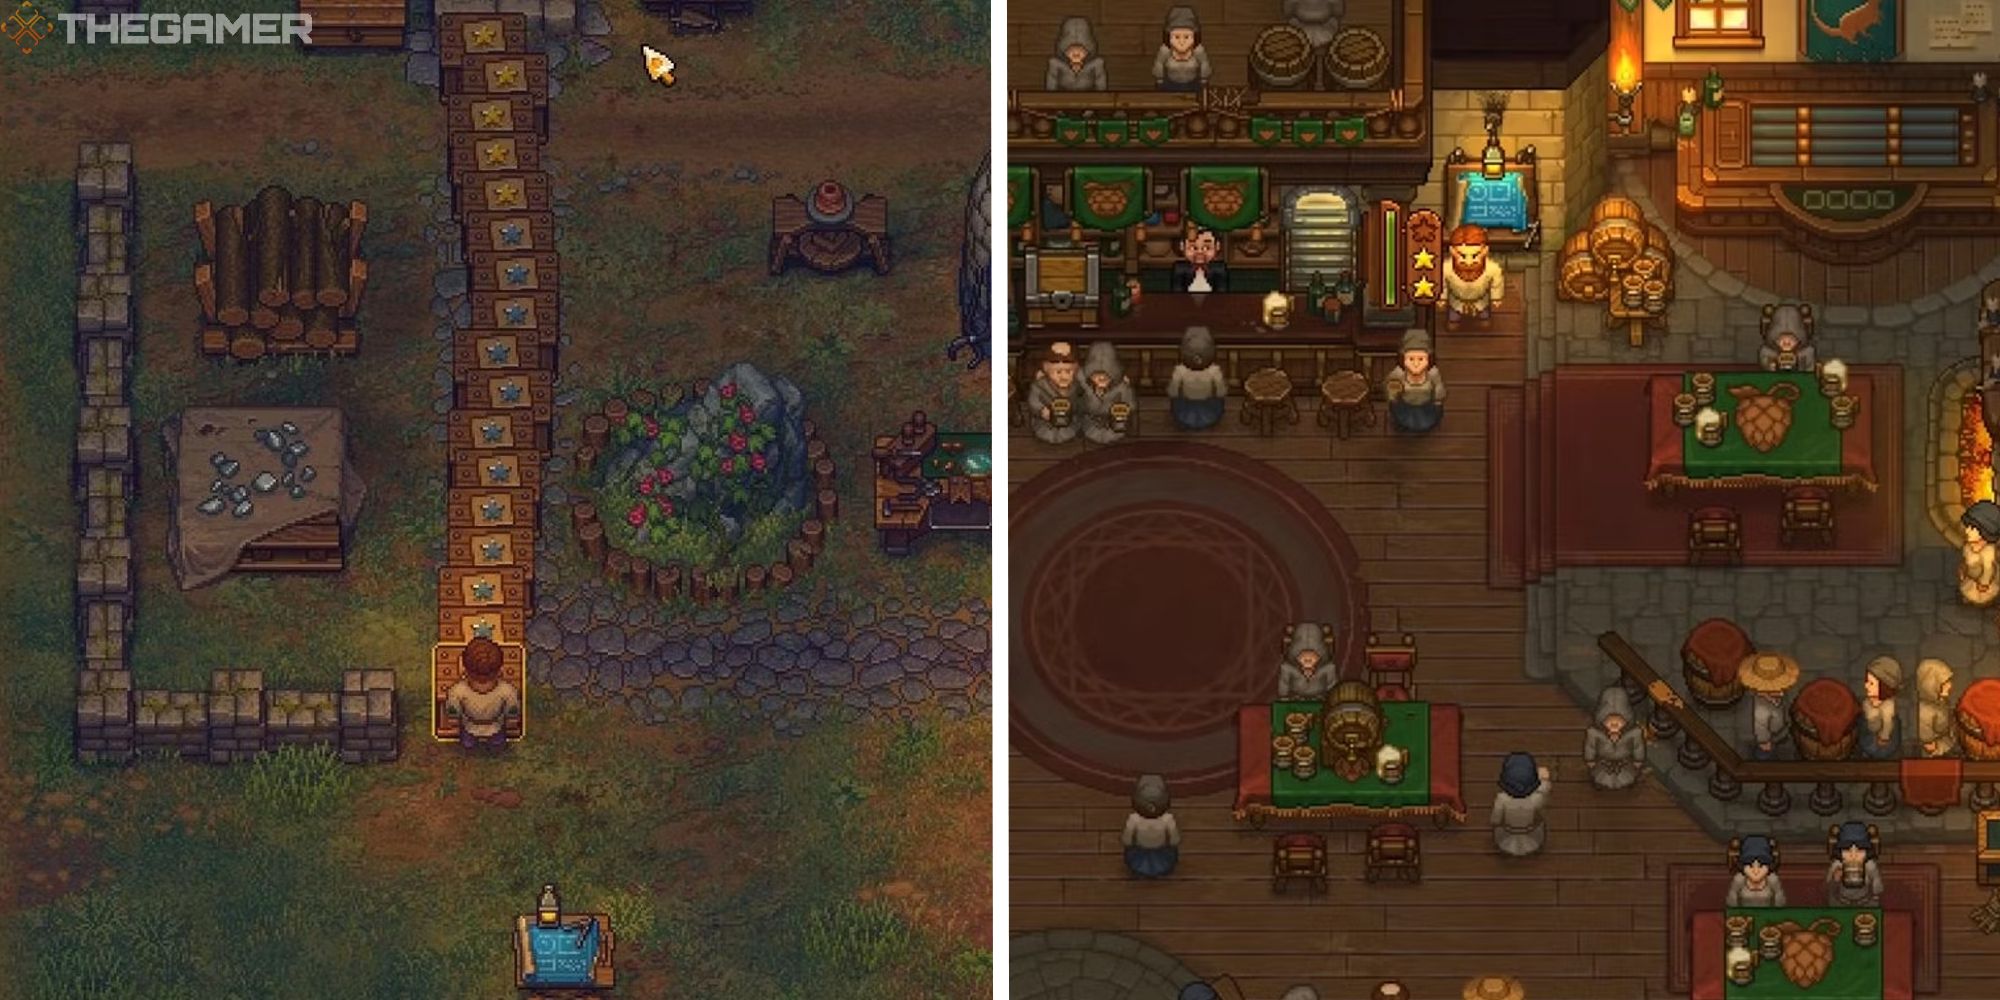 split image showing player with produce crates next to image of talking skull tavern